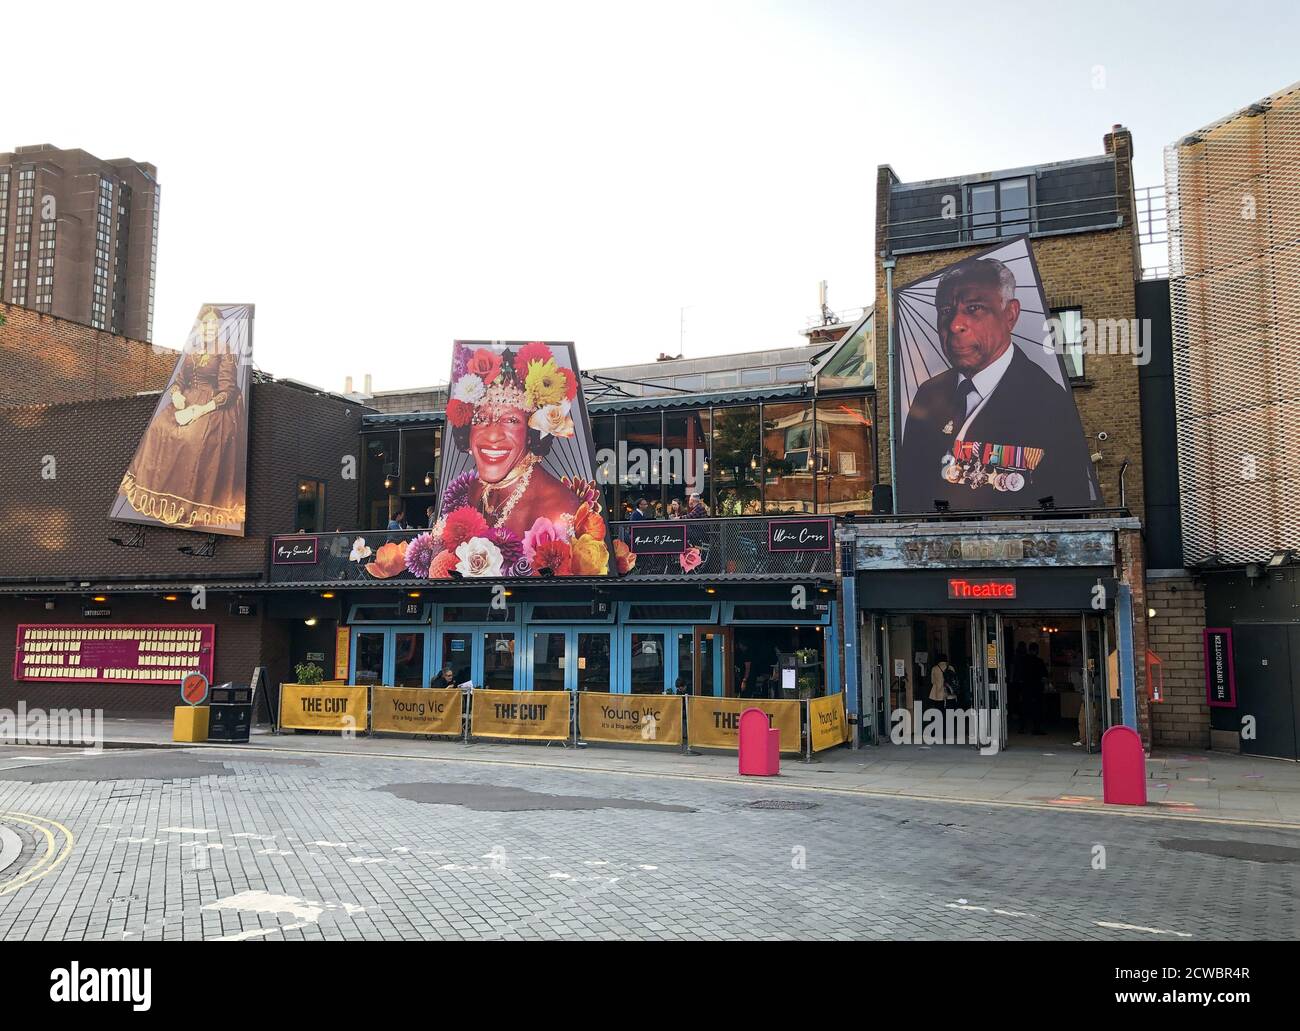 The Young Vic Theatre in The Cut, London SE1 celebrates its 50th Birthday in September 2020. An outdoor art installation 'The Unforgotten' created by Sadeysa Greenway-Bailey & Anna Fleischle features portraits of unsung trailblazers Mary Seacole, Marsha P. Johnson and Ulric Cross. Stock Photo